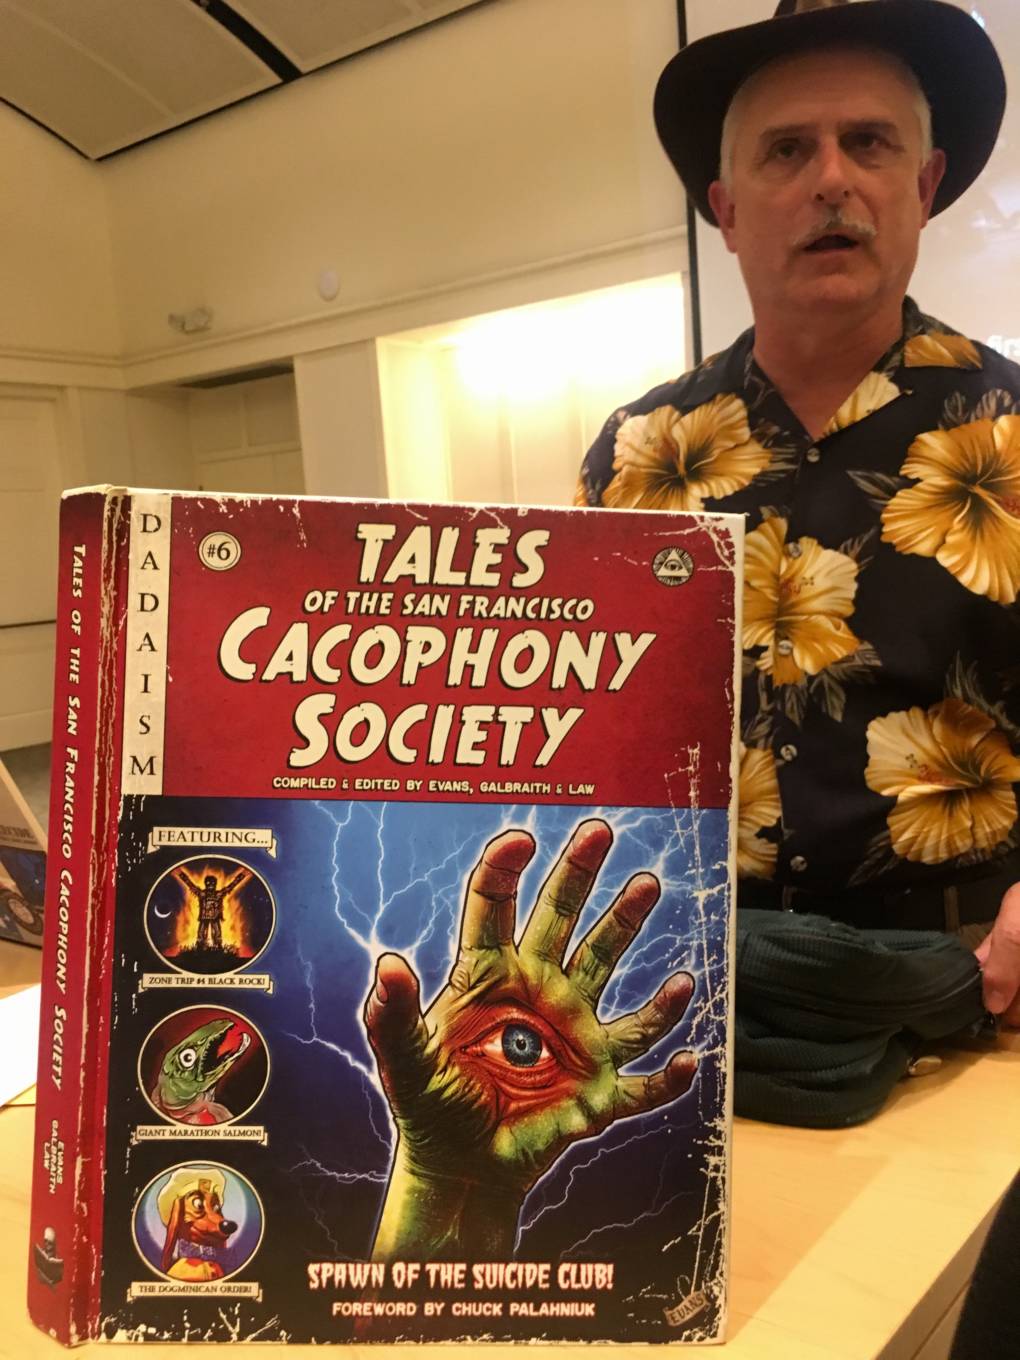 John Law stands behind a book about the Cacophony Society.